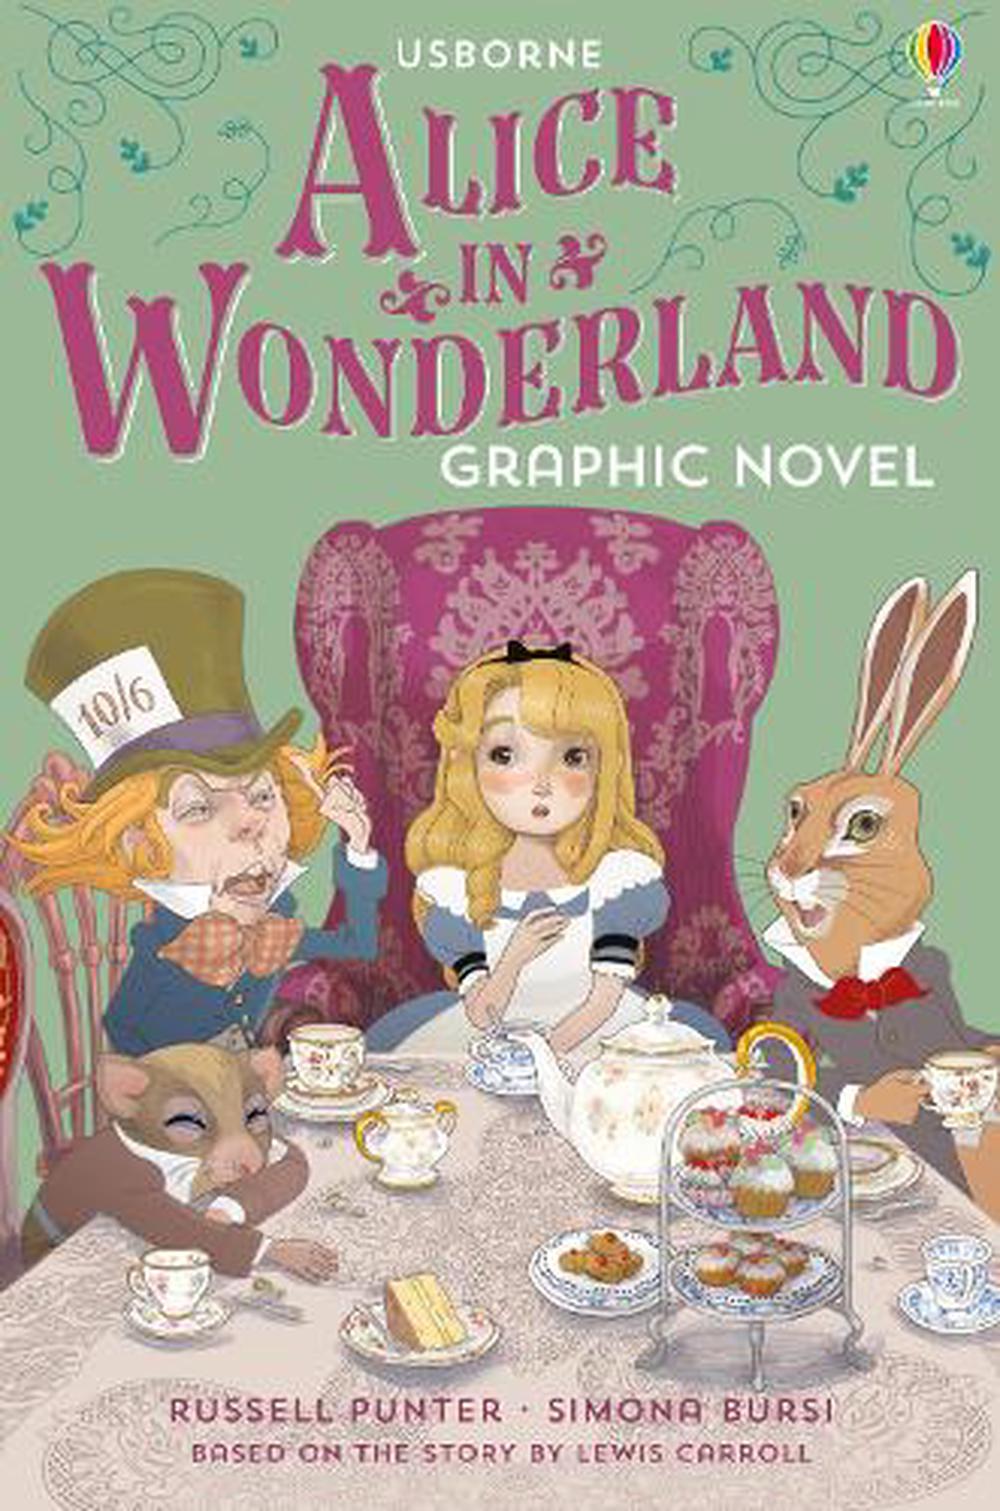 book review for alice in wonderland